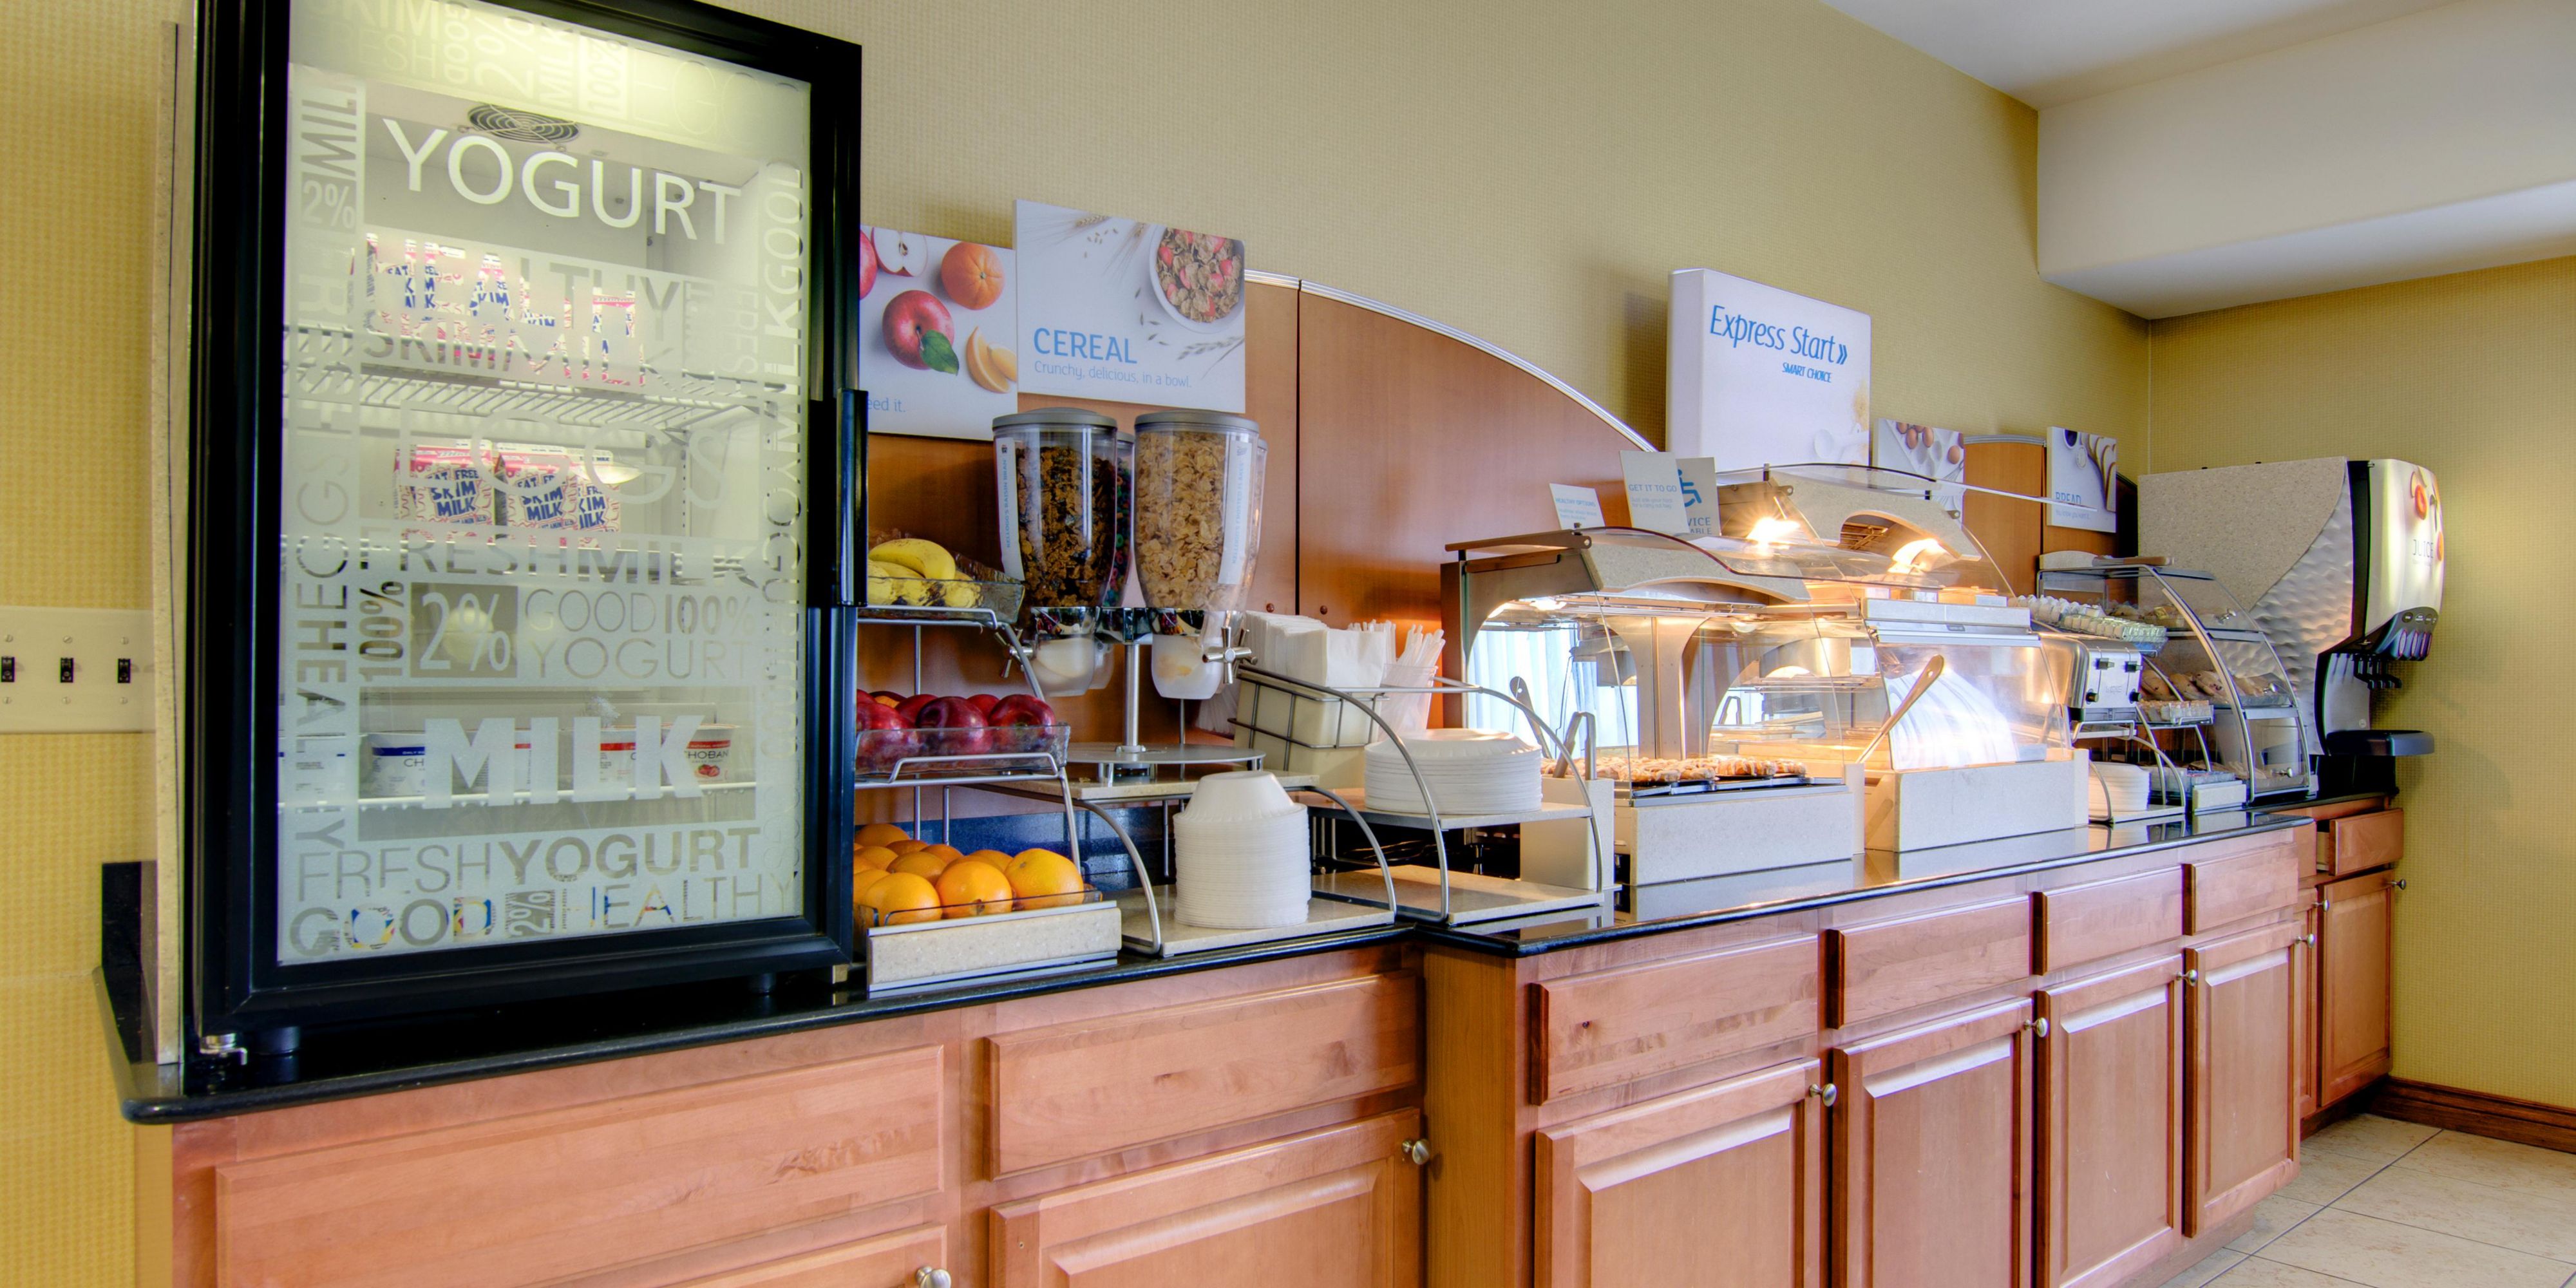 Our complimentary Breakfast bar offers a wide variety of hot & cold options and Smart Roast coffee. Let us fuel you for your day!